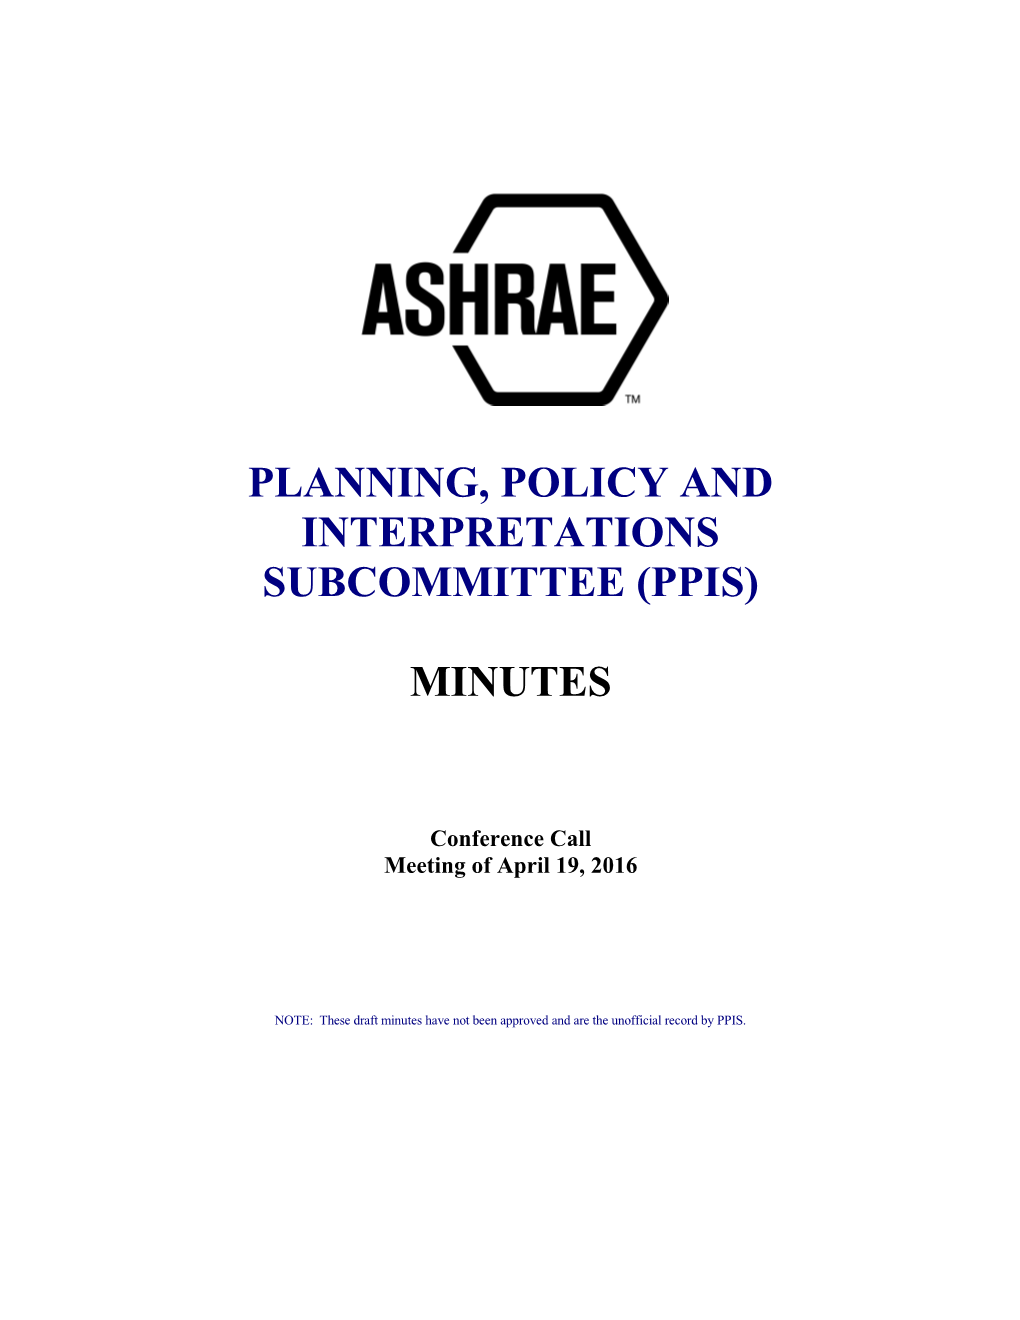 Planning, Policy and Interpretations Subcommittee (Ppis)